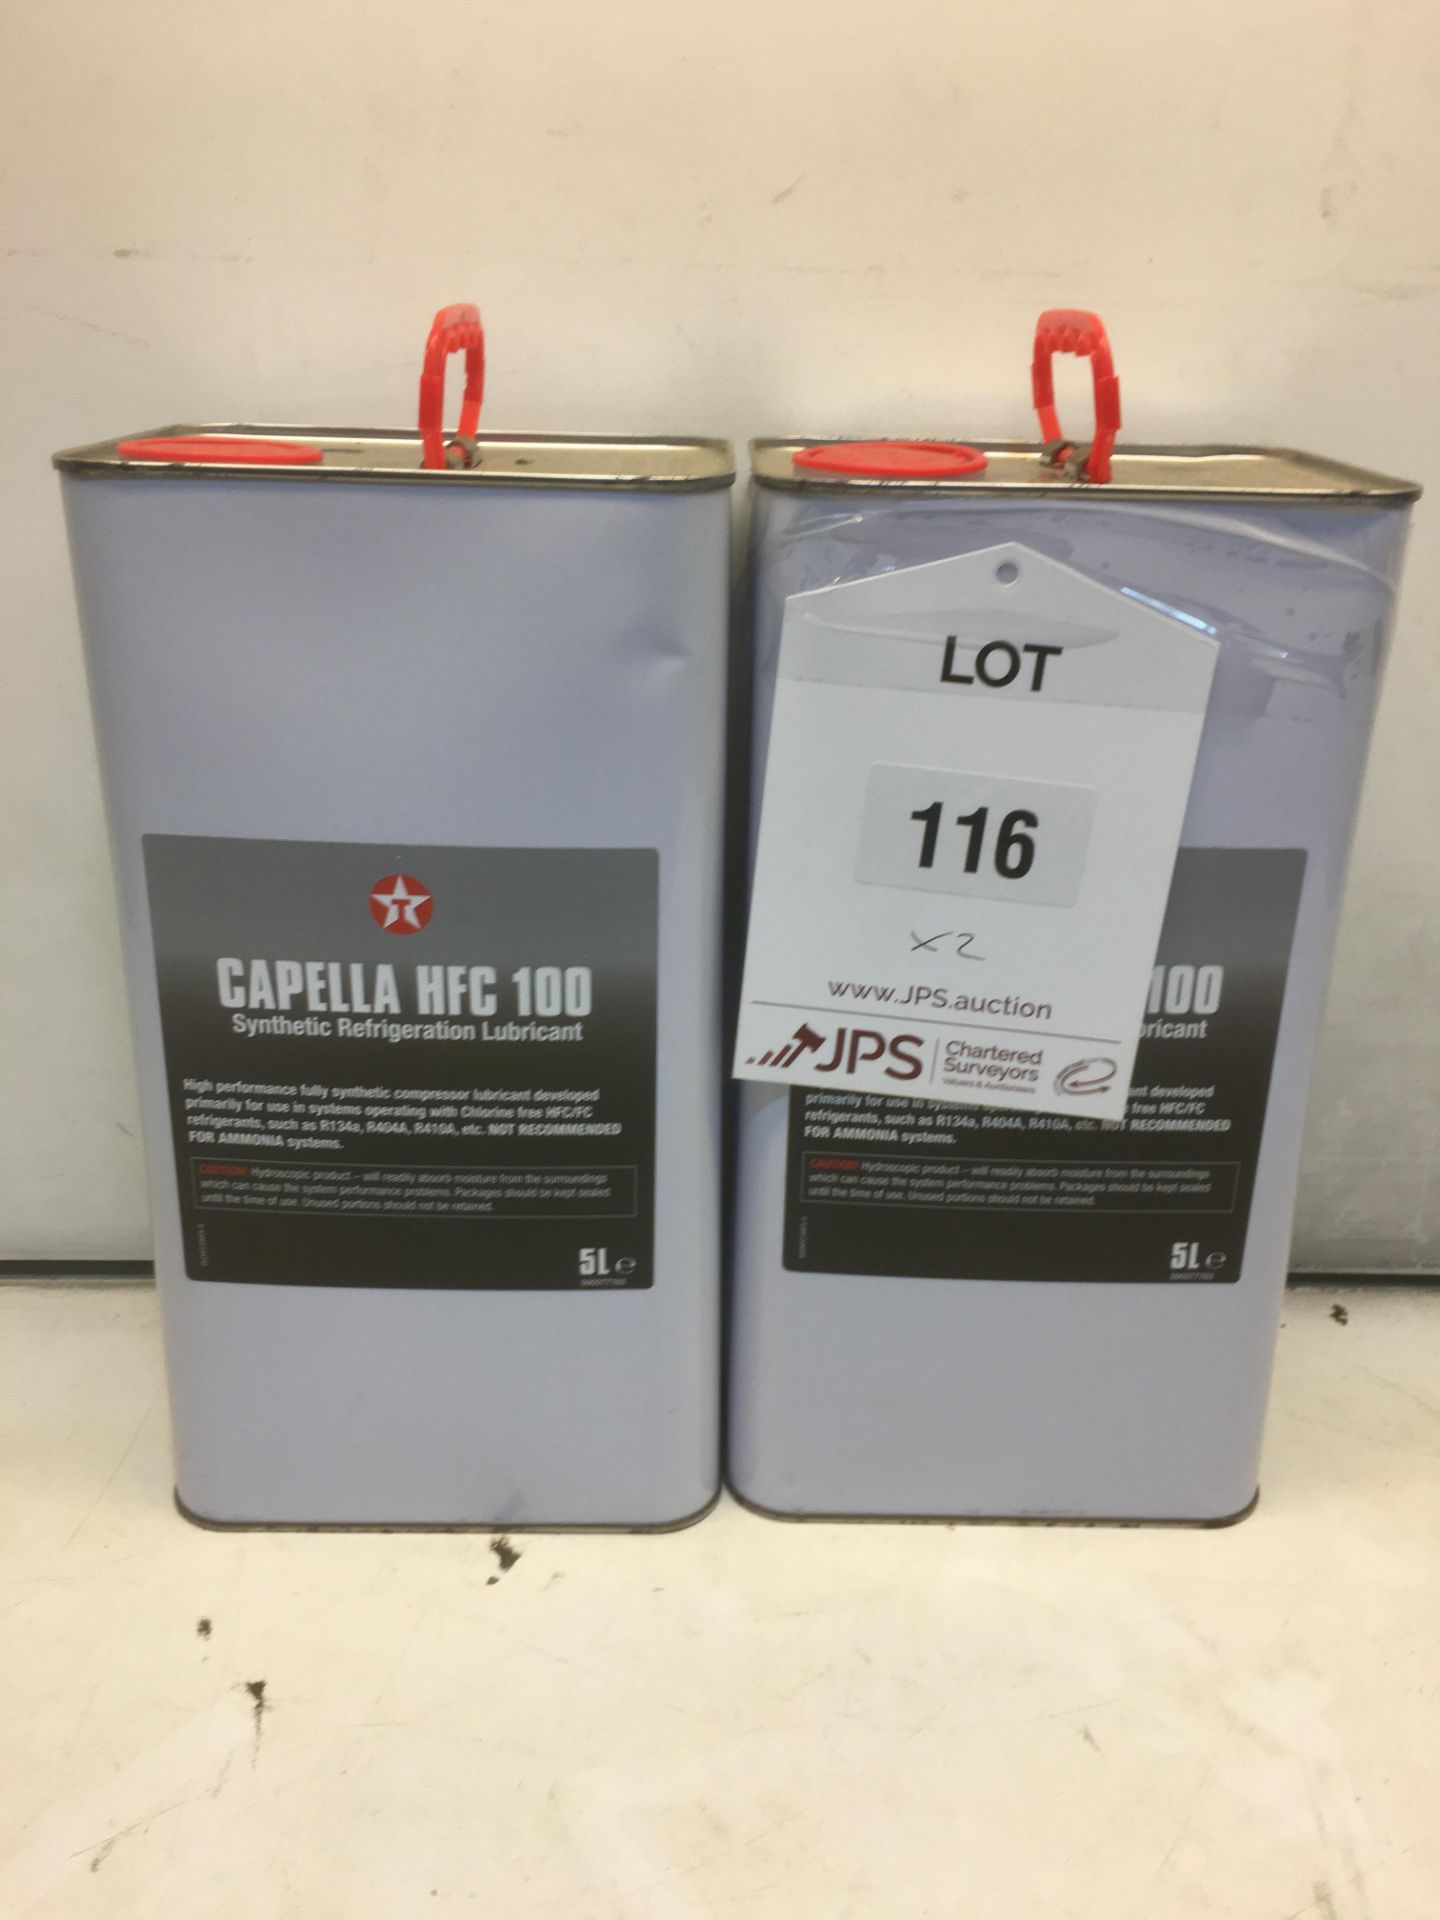 2 x Capella HFC 100 Synthetic Refrigeration Lubricant - 5L